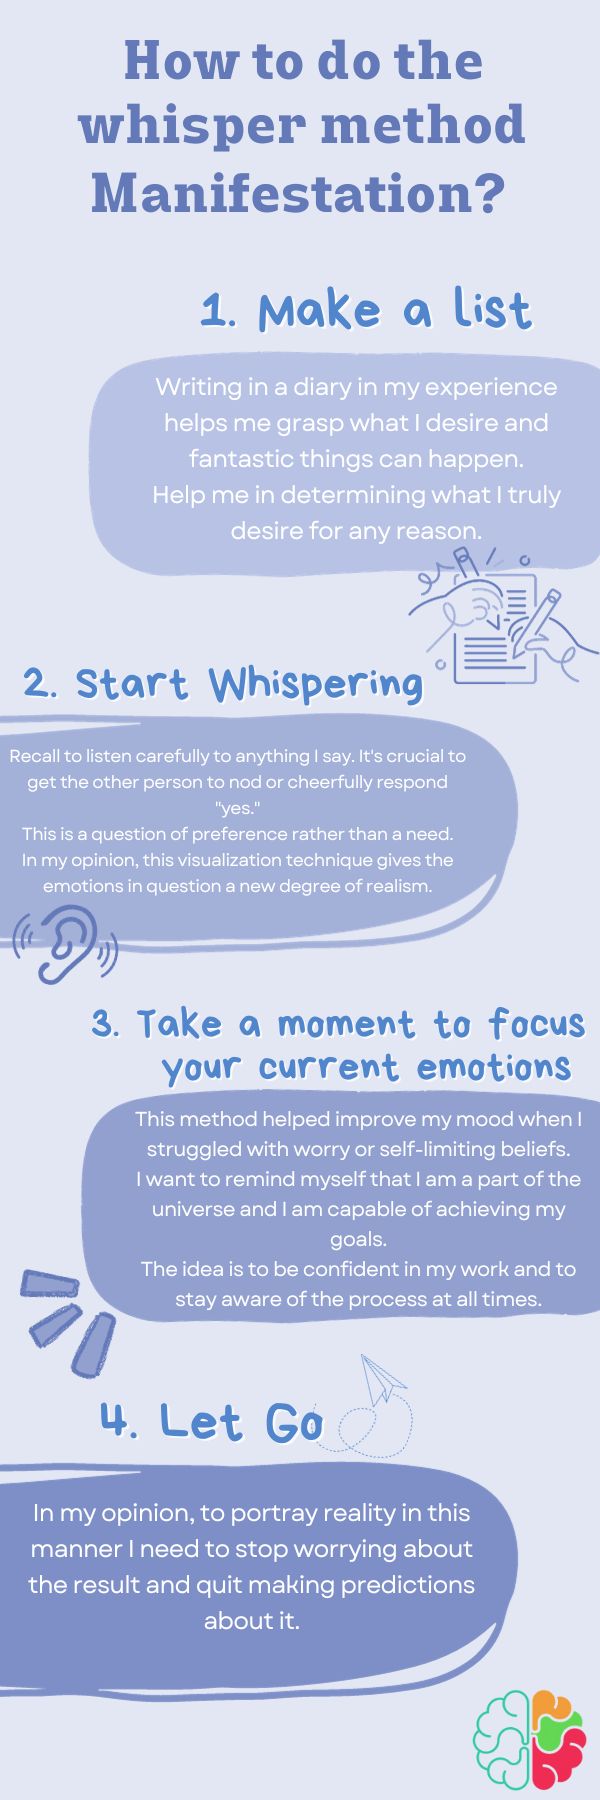 infographic about How to do the whisper method